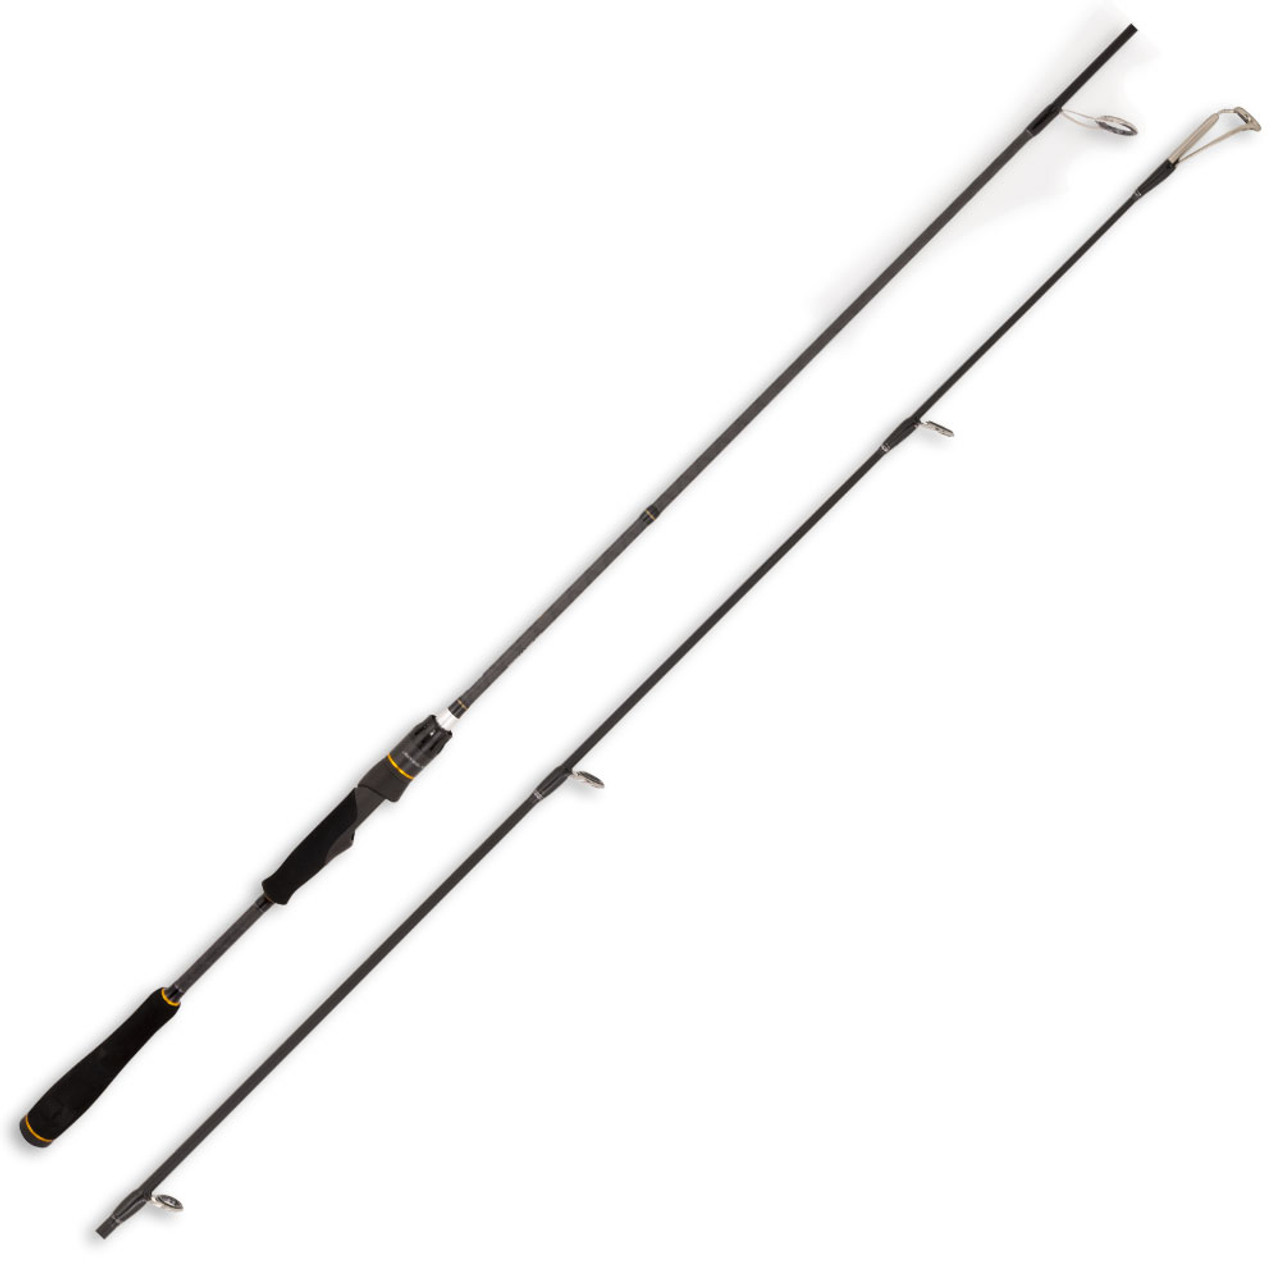 Abu Garcia Salty Stage Light Casting Fishing Rods For Sale